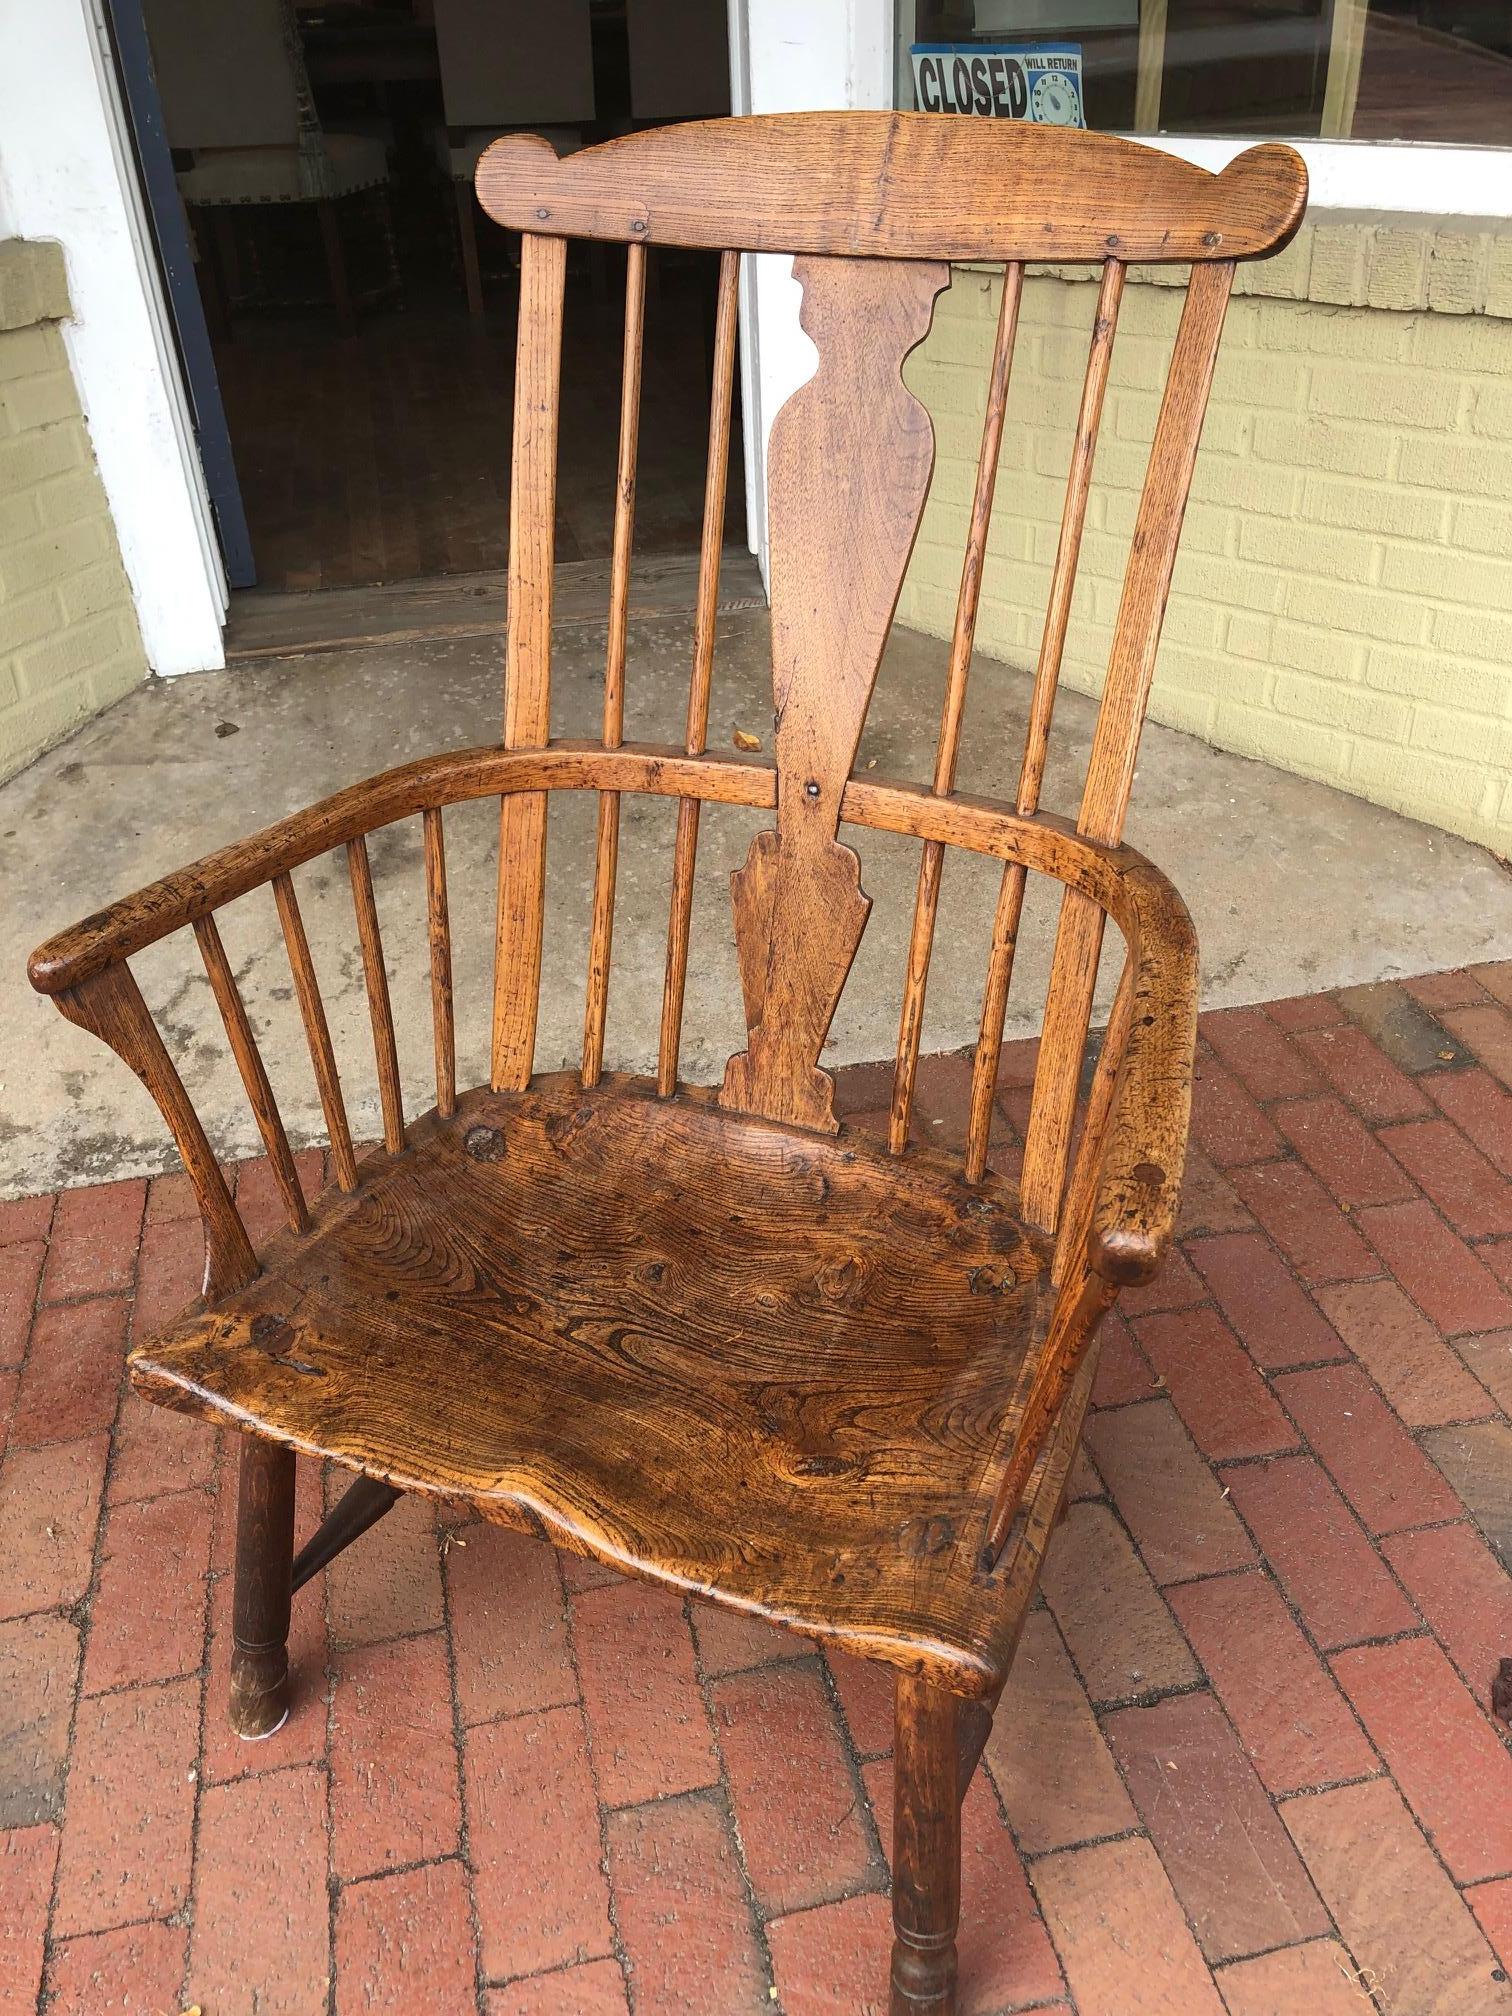 This 18th century English “Comb-Back” Windsor armchair made of ash, elm and walnut is not only beautiful is very comfortable too. Deep, lustrous color with warm patination and delicate spindles with central shaped splat. Elegant curved arms over a